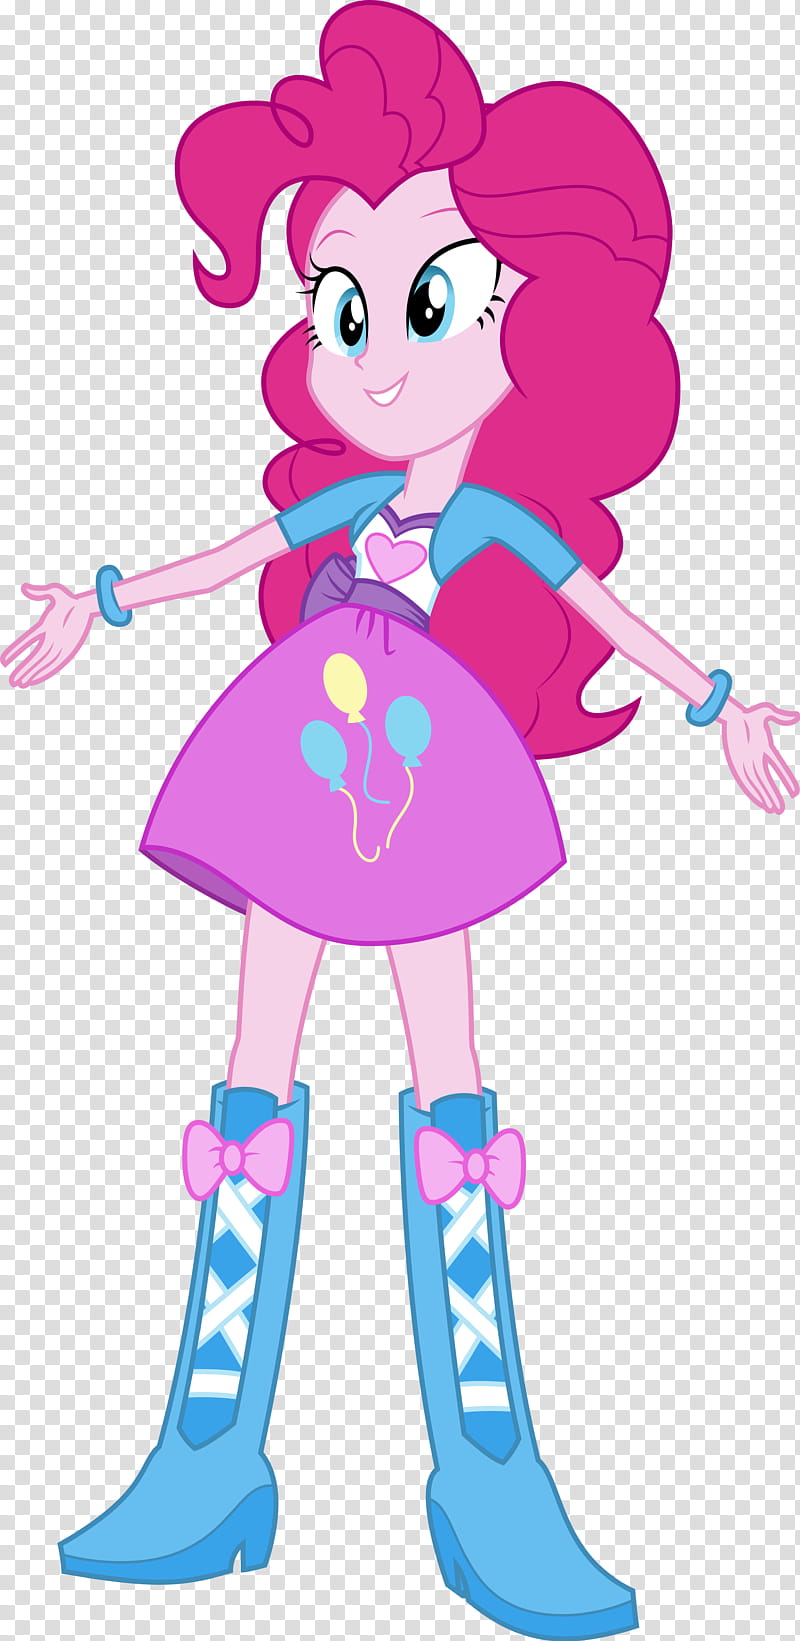 MLP EqG Pinkie Pie, pink and blue female anime illustration transparent background PNG clipart